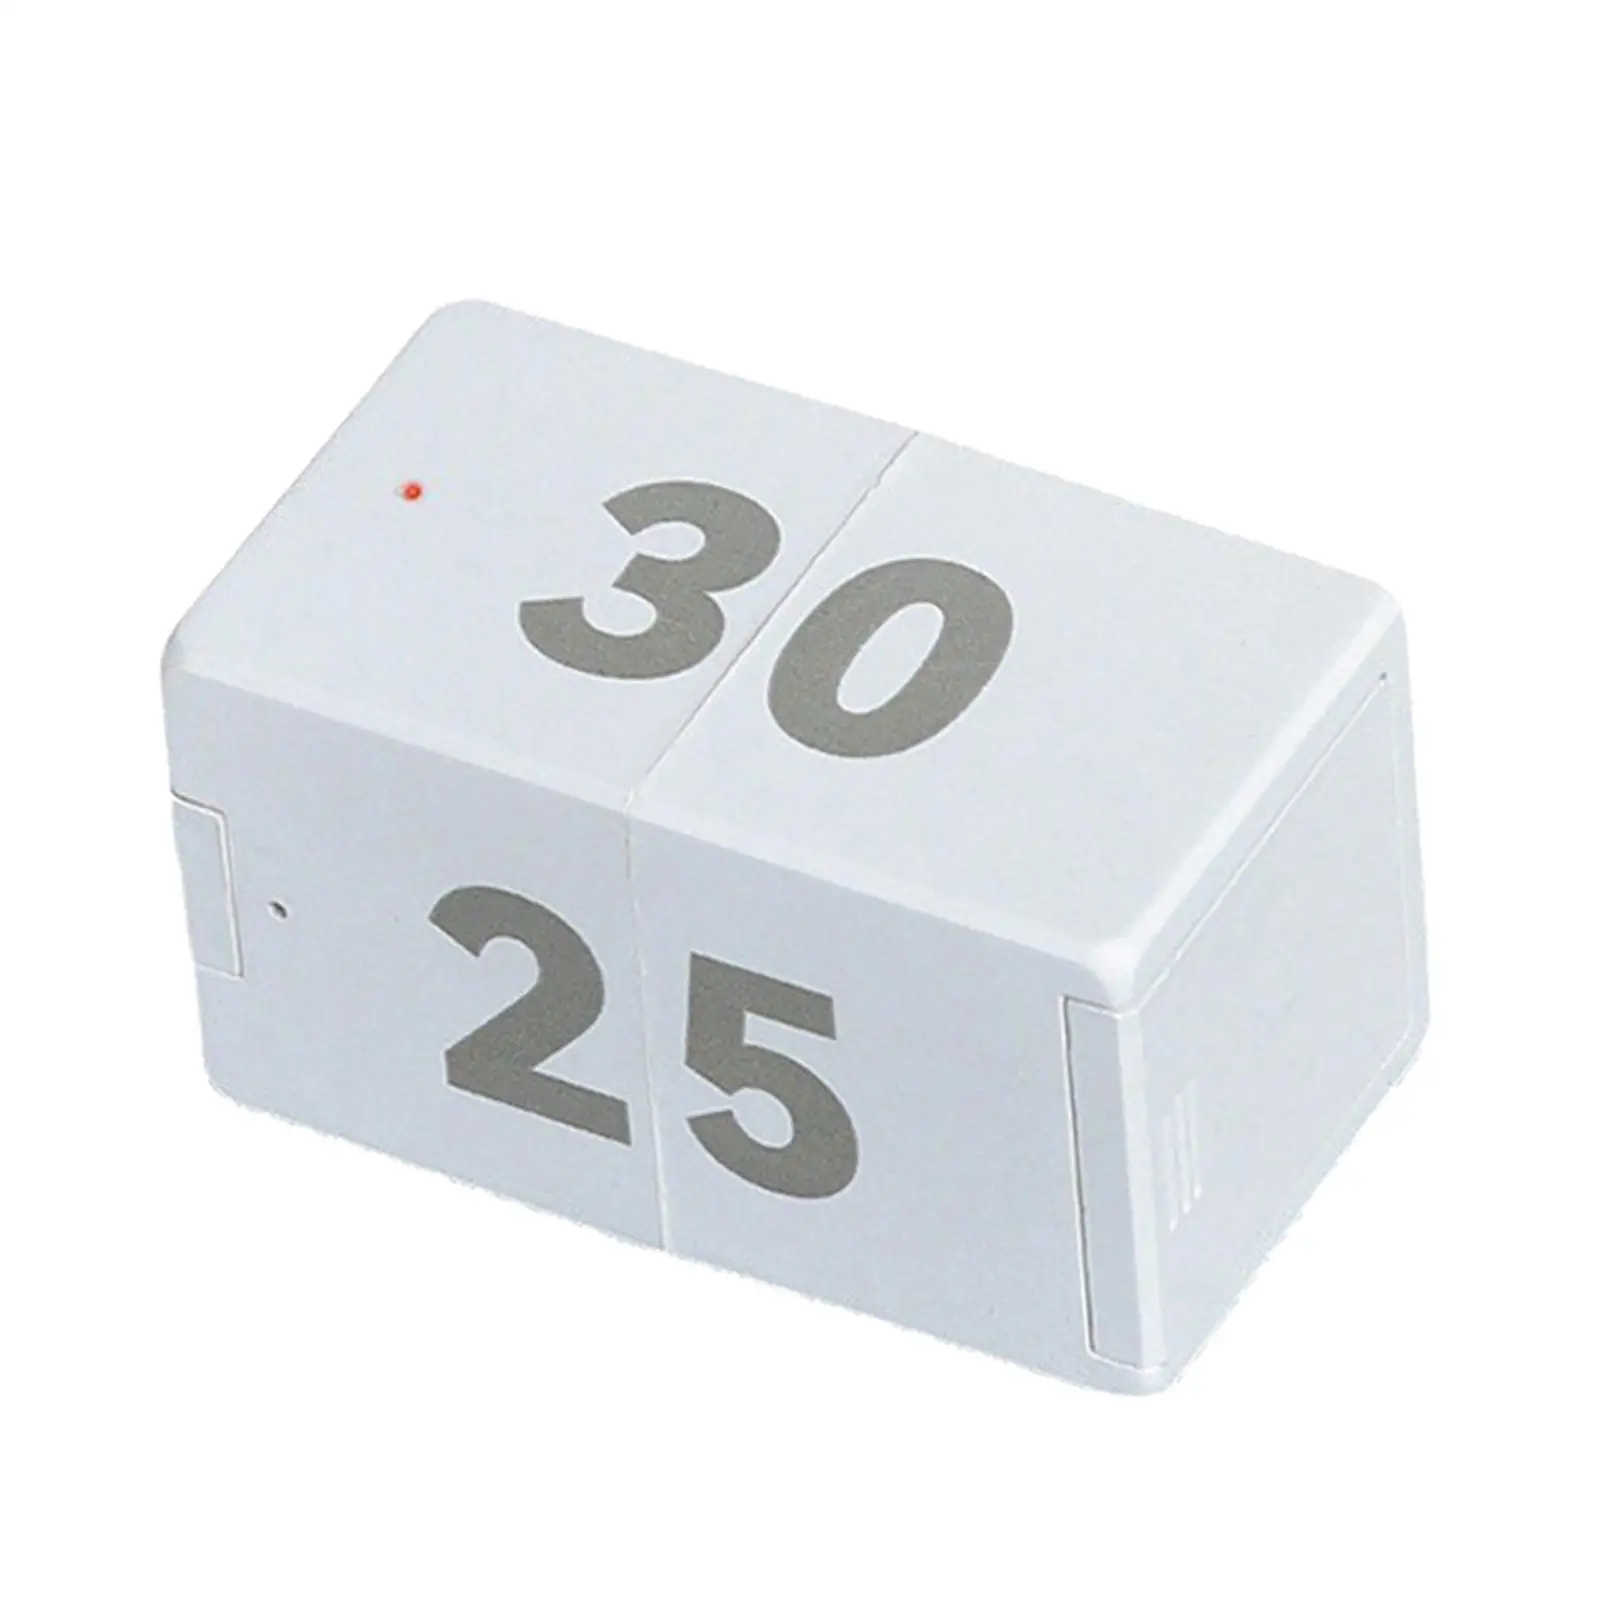 Cube Timers Workout Timer with Adjusted Volume Flip Countdown Timer for Working Learning Management Workout